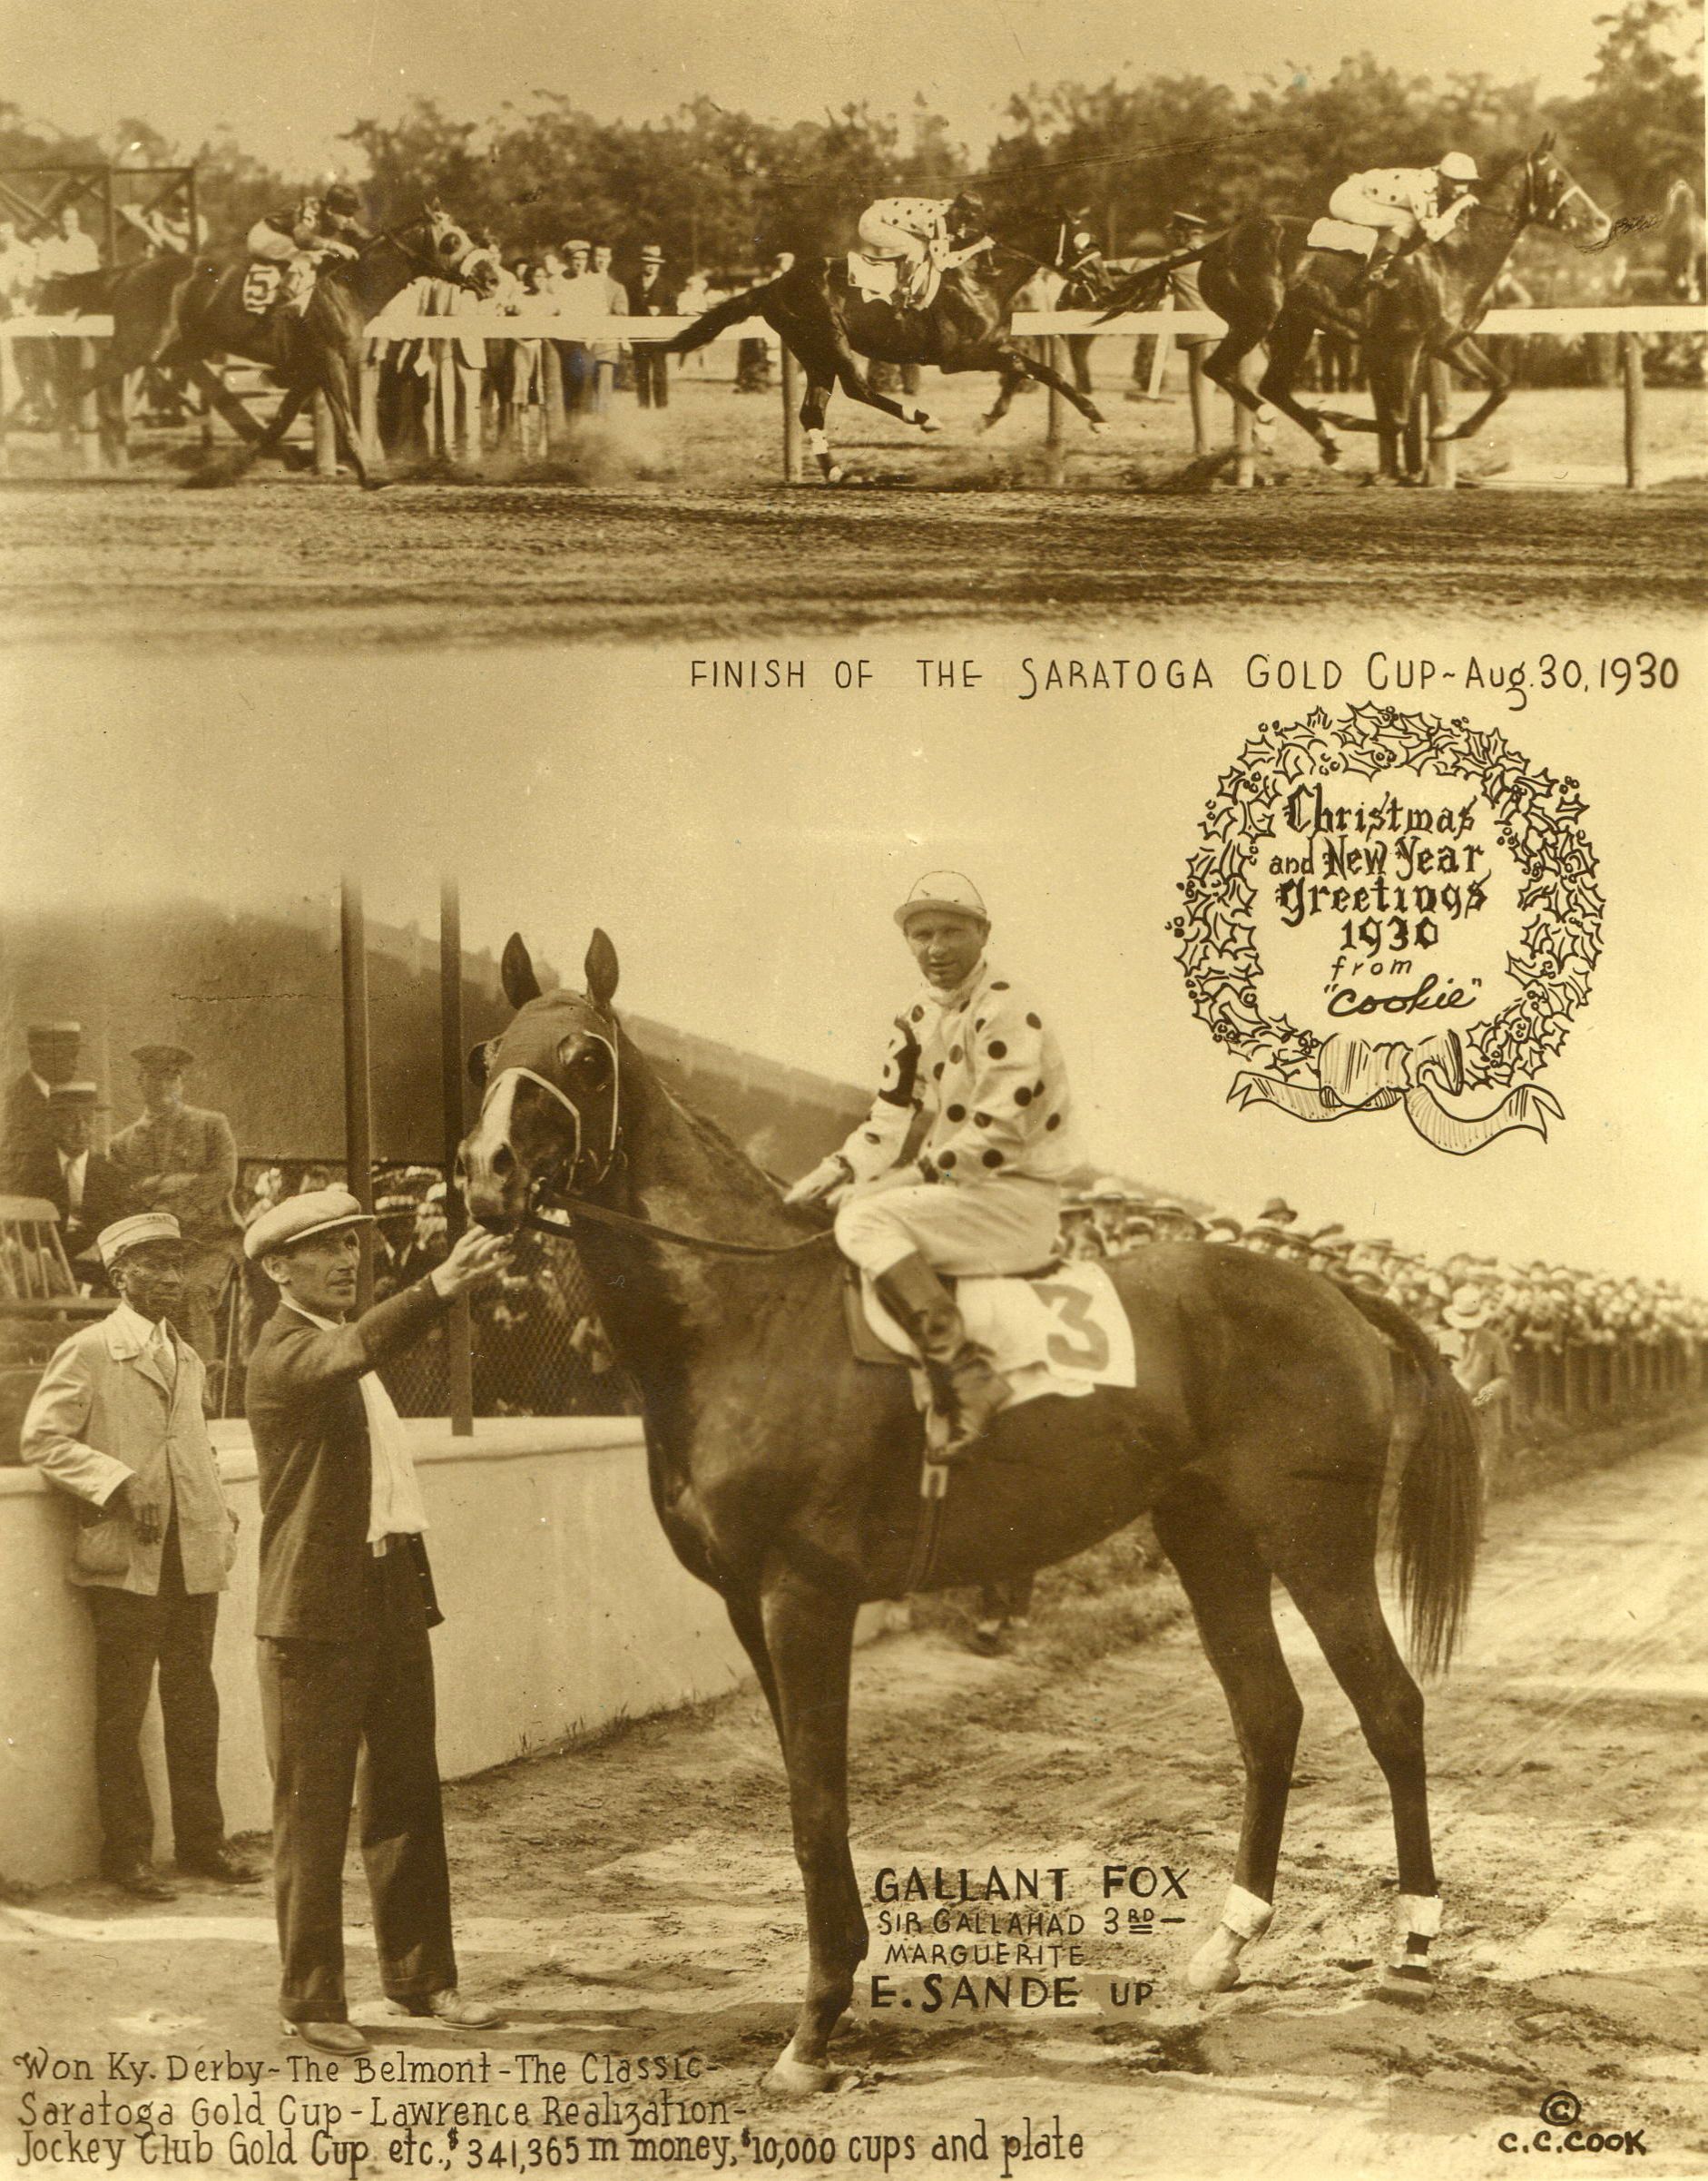 The 1930 Saratoga Cup, won by Gallant Fox (Earl Sande up) featured in the annual "Christmas Cookie" greeting card produced by photographer C. C. Cook (C.C. Cook/Museum Collection)